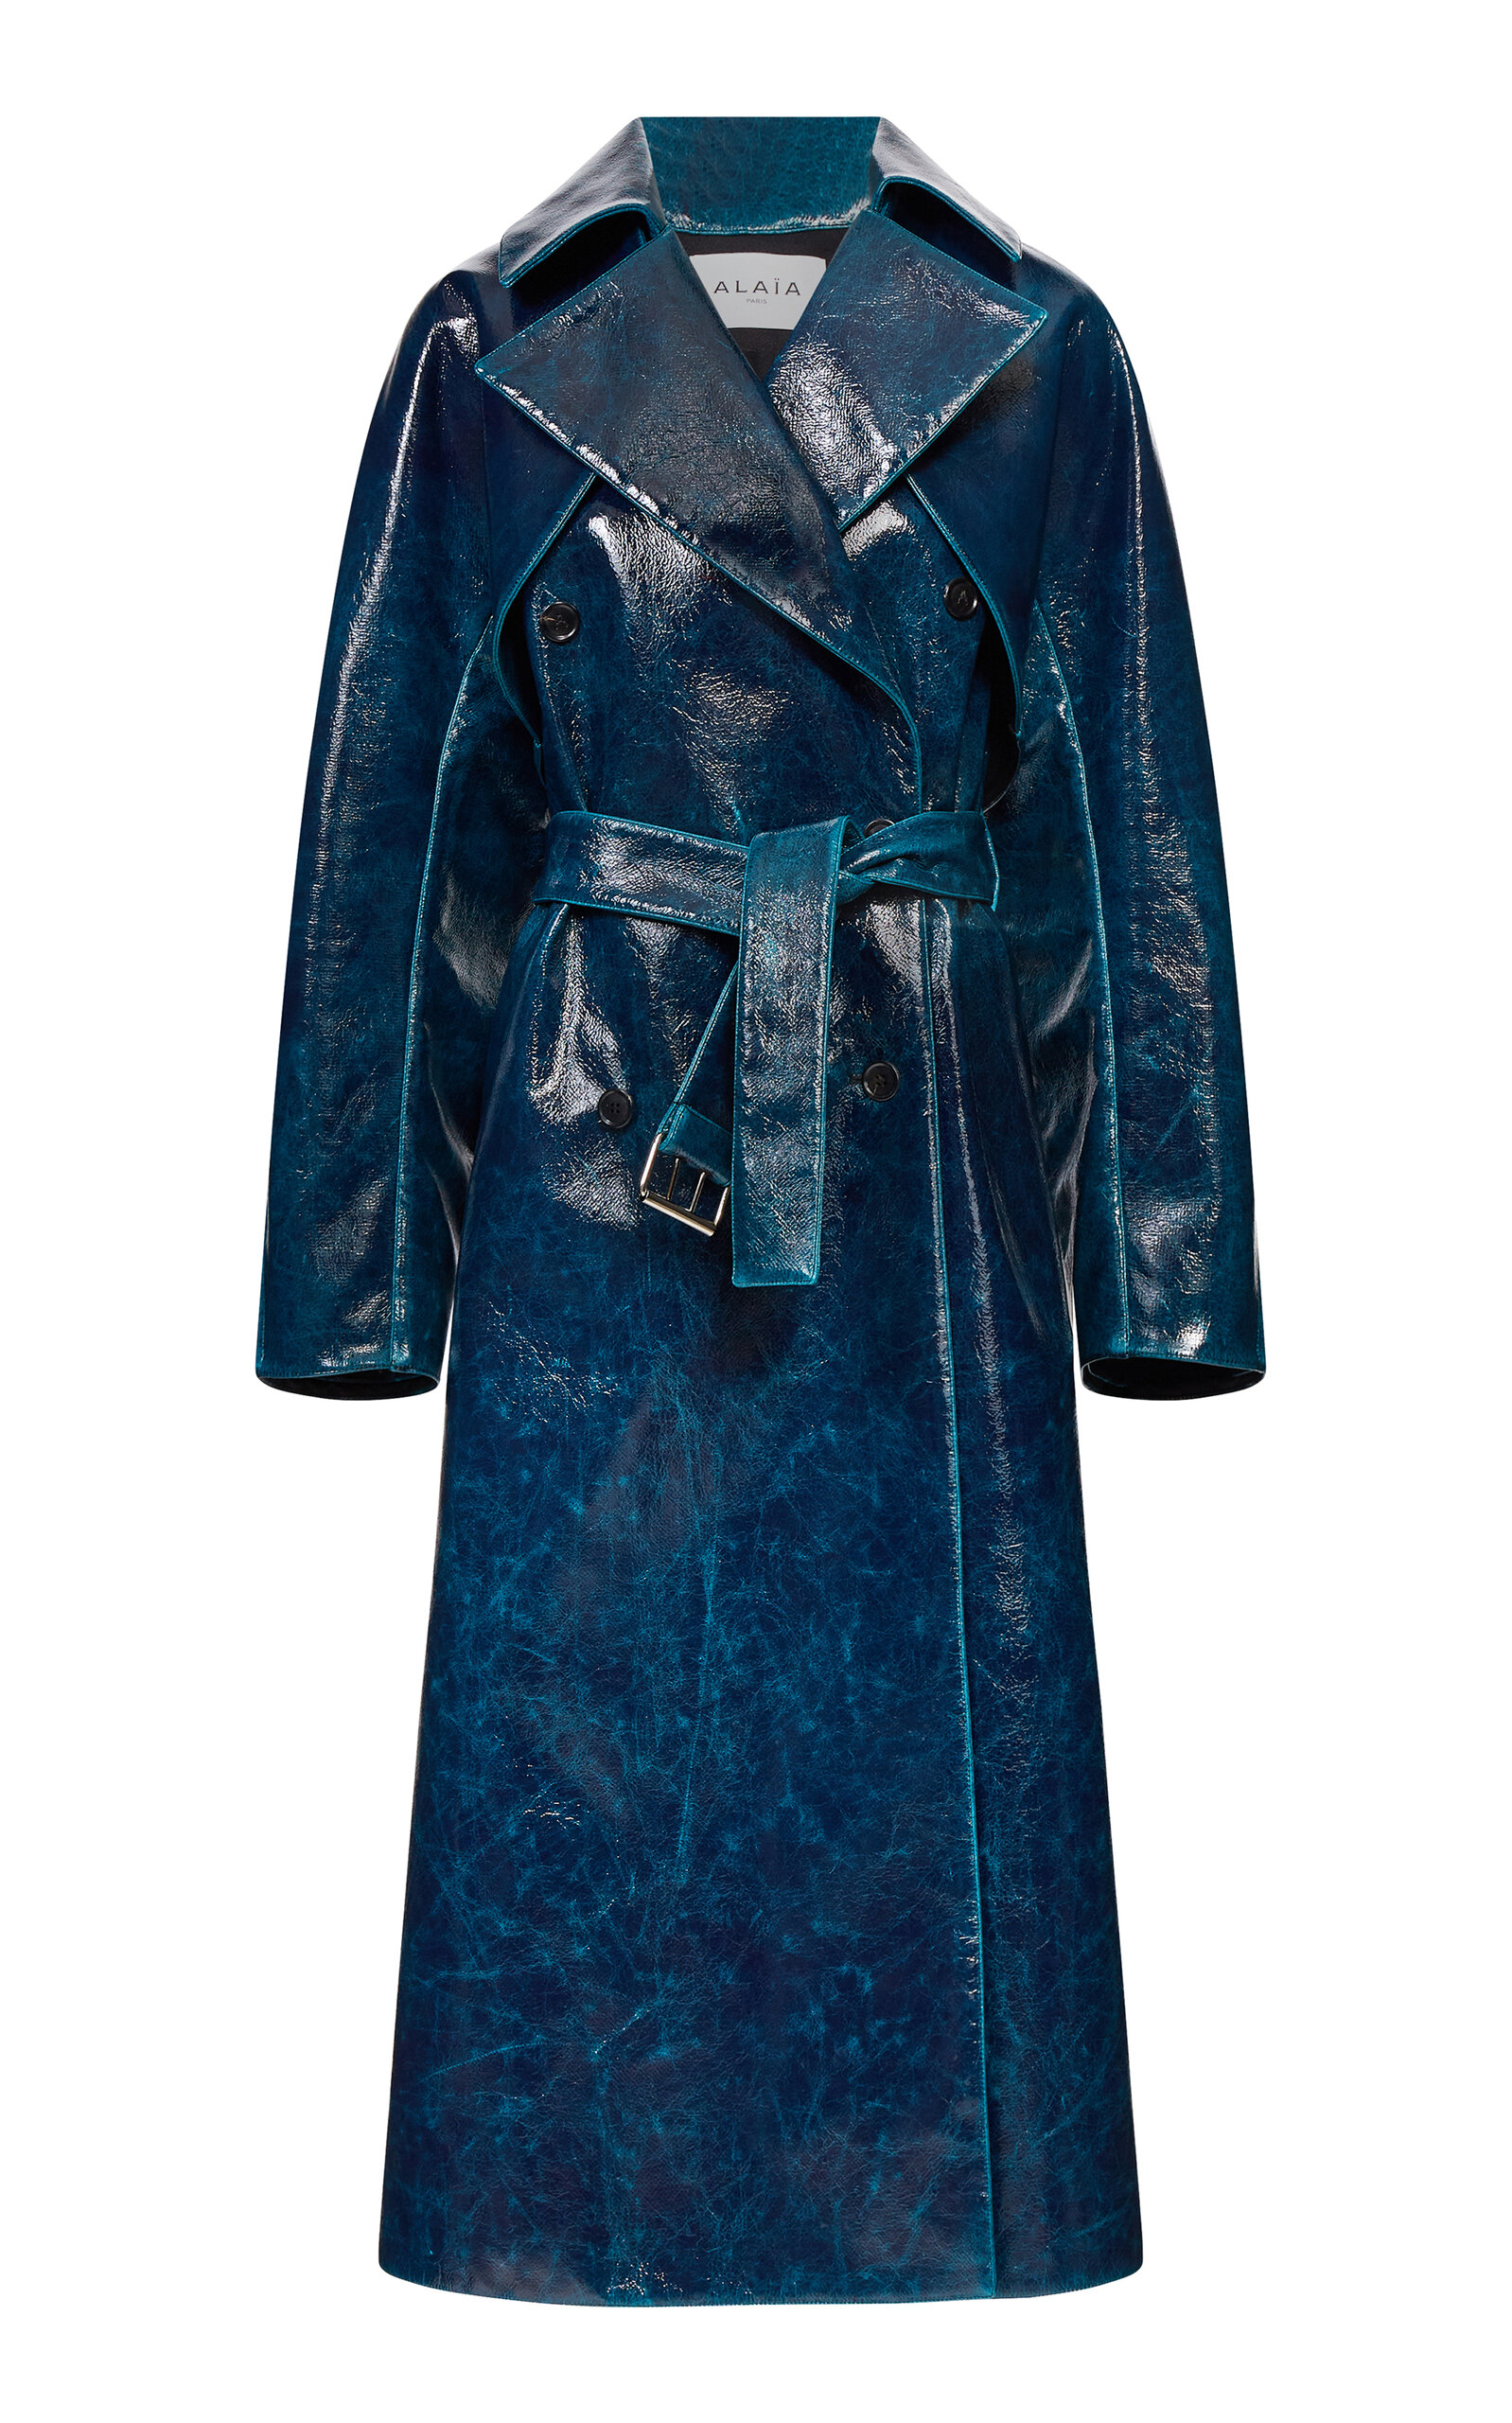 Alaïa Lacquered Wool-blend Trench Coat In Bleu Petrole